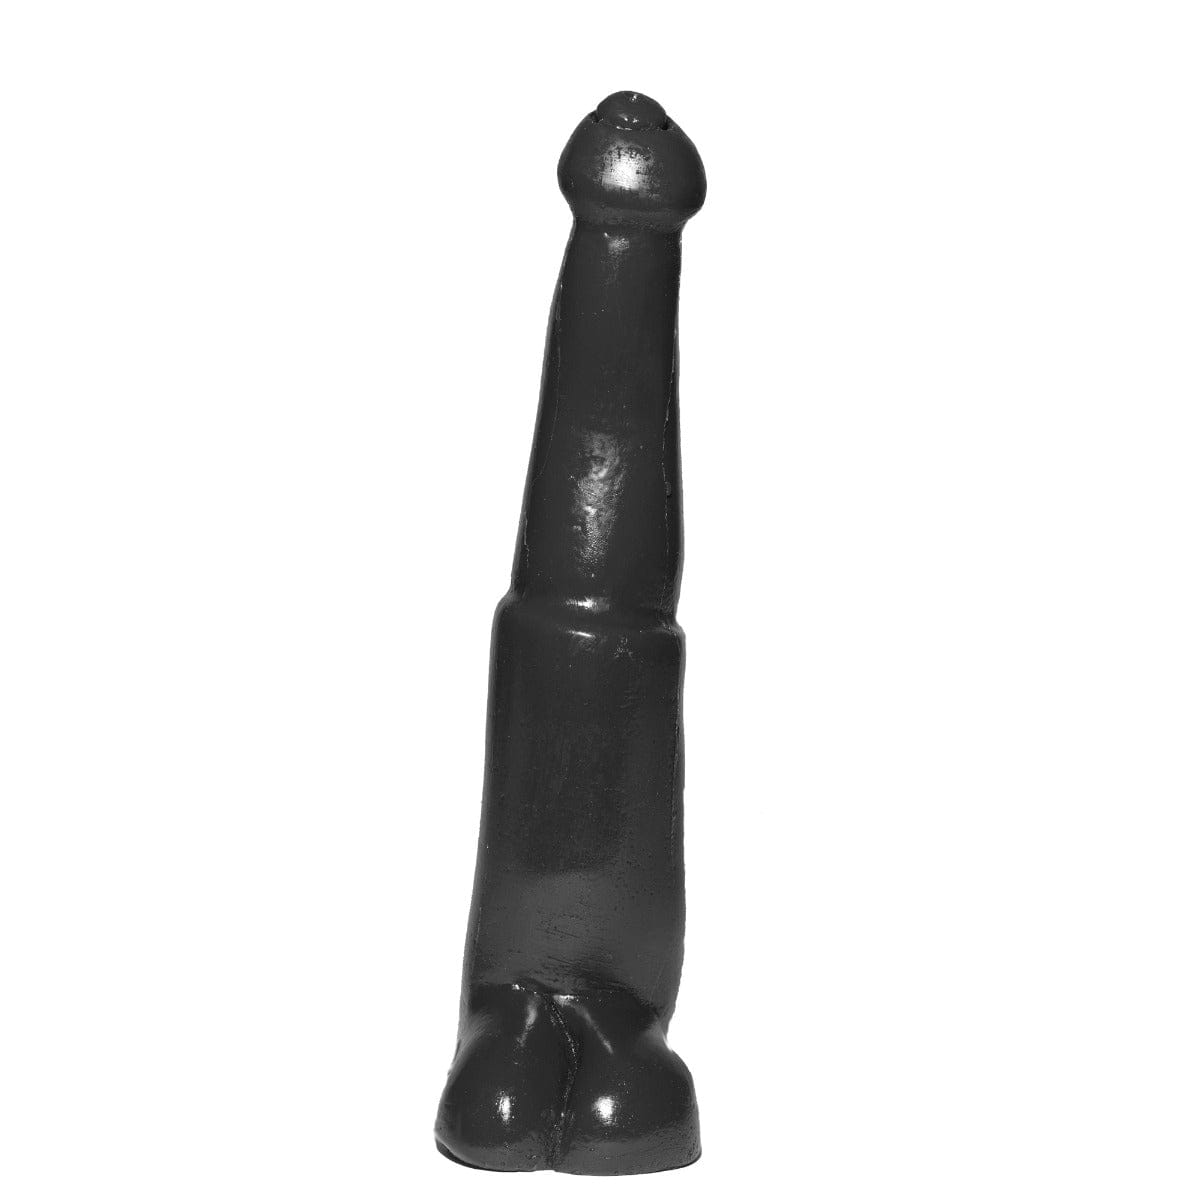 Prowler RED The Beast 10 inch Dildo Black prowler red - For Me To Love